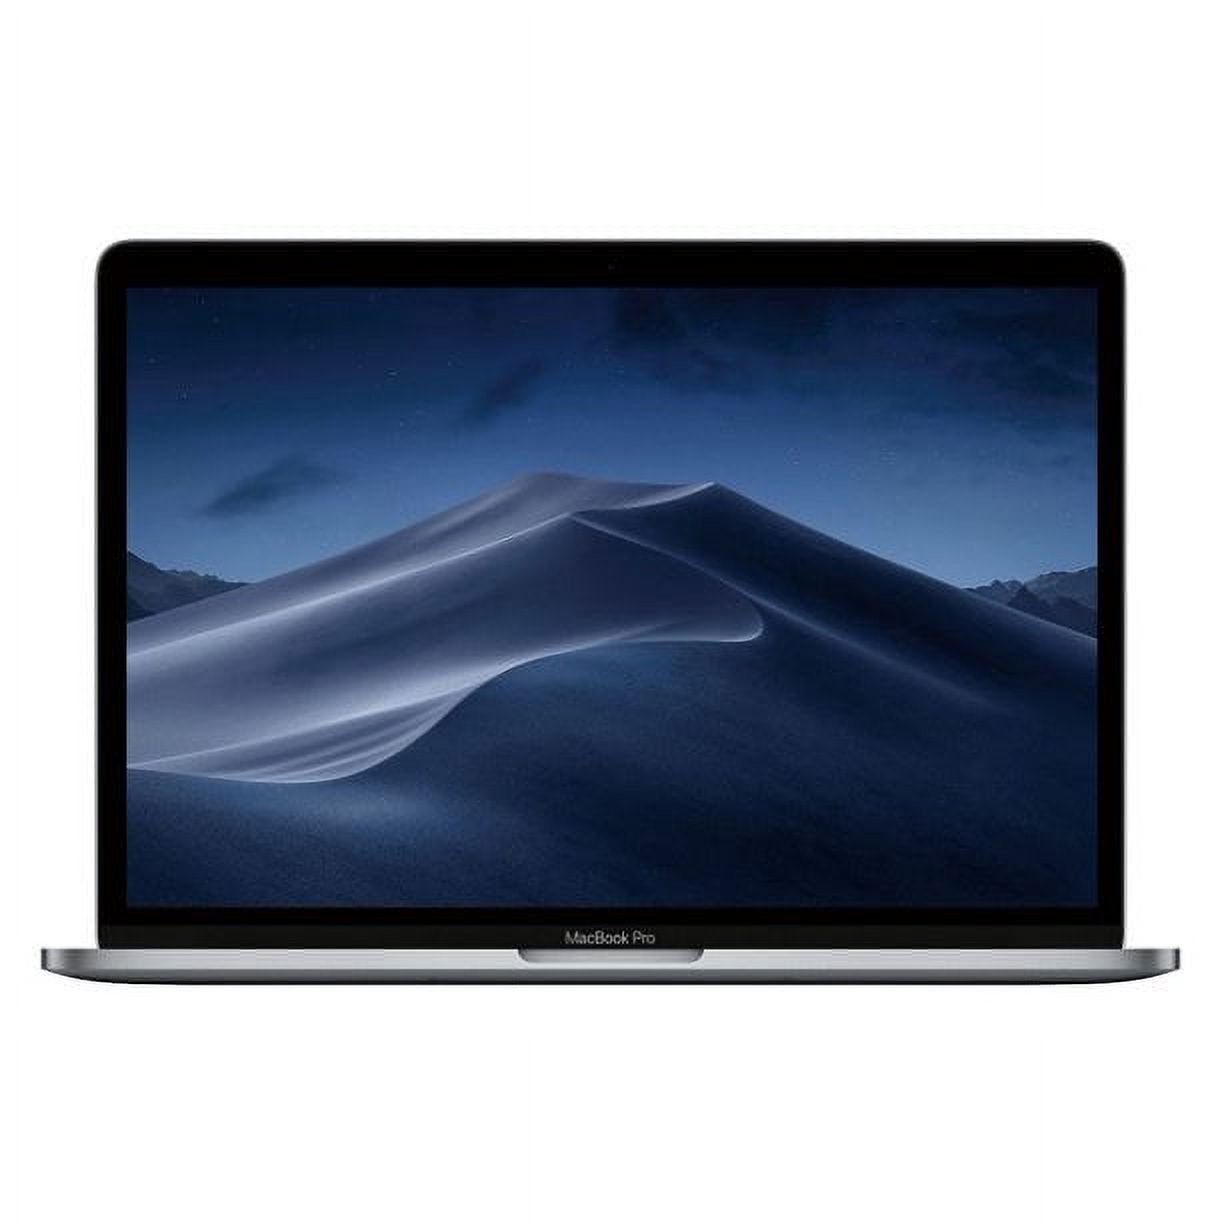 Pre-Owned Apple MacBook Pro Laptop, FHD 15" Retina Display with Touch Bar OR Touch ID45, Intel Core i7, 16GB RAM, 256GB SSD, MacOSx Catalina, Silver, MPTT2LL/A (Good) - image 1 of 4